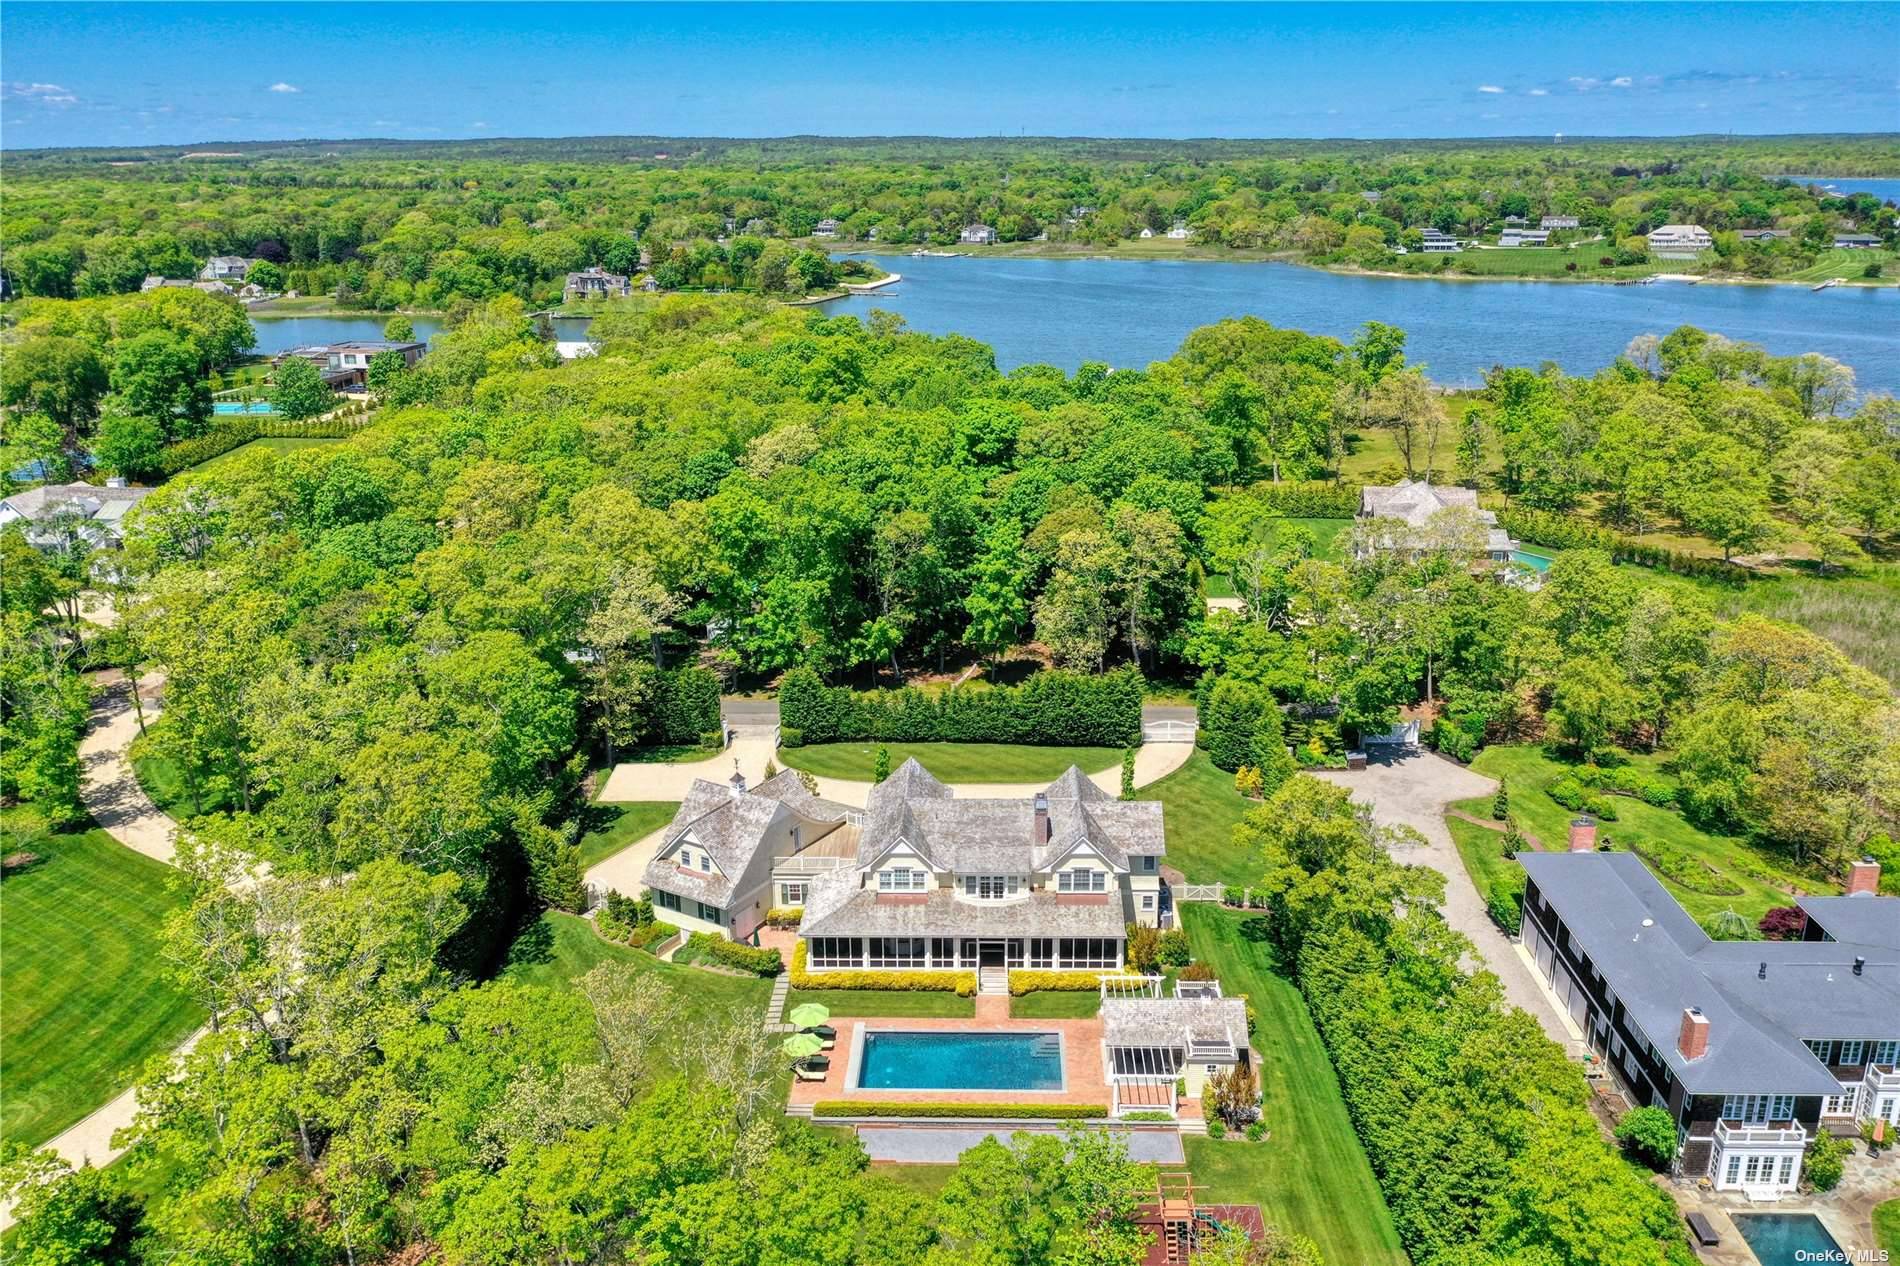 Situated on 2. 8 waterfront acres on prestigious Bay Road in the Village of Quogue, this grand shingled residence offers the ultimate in Hampton's living !